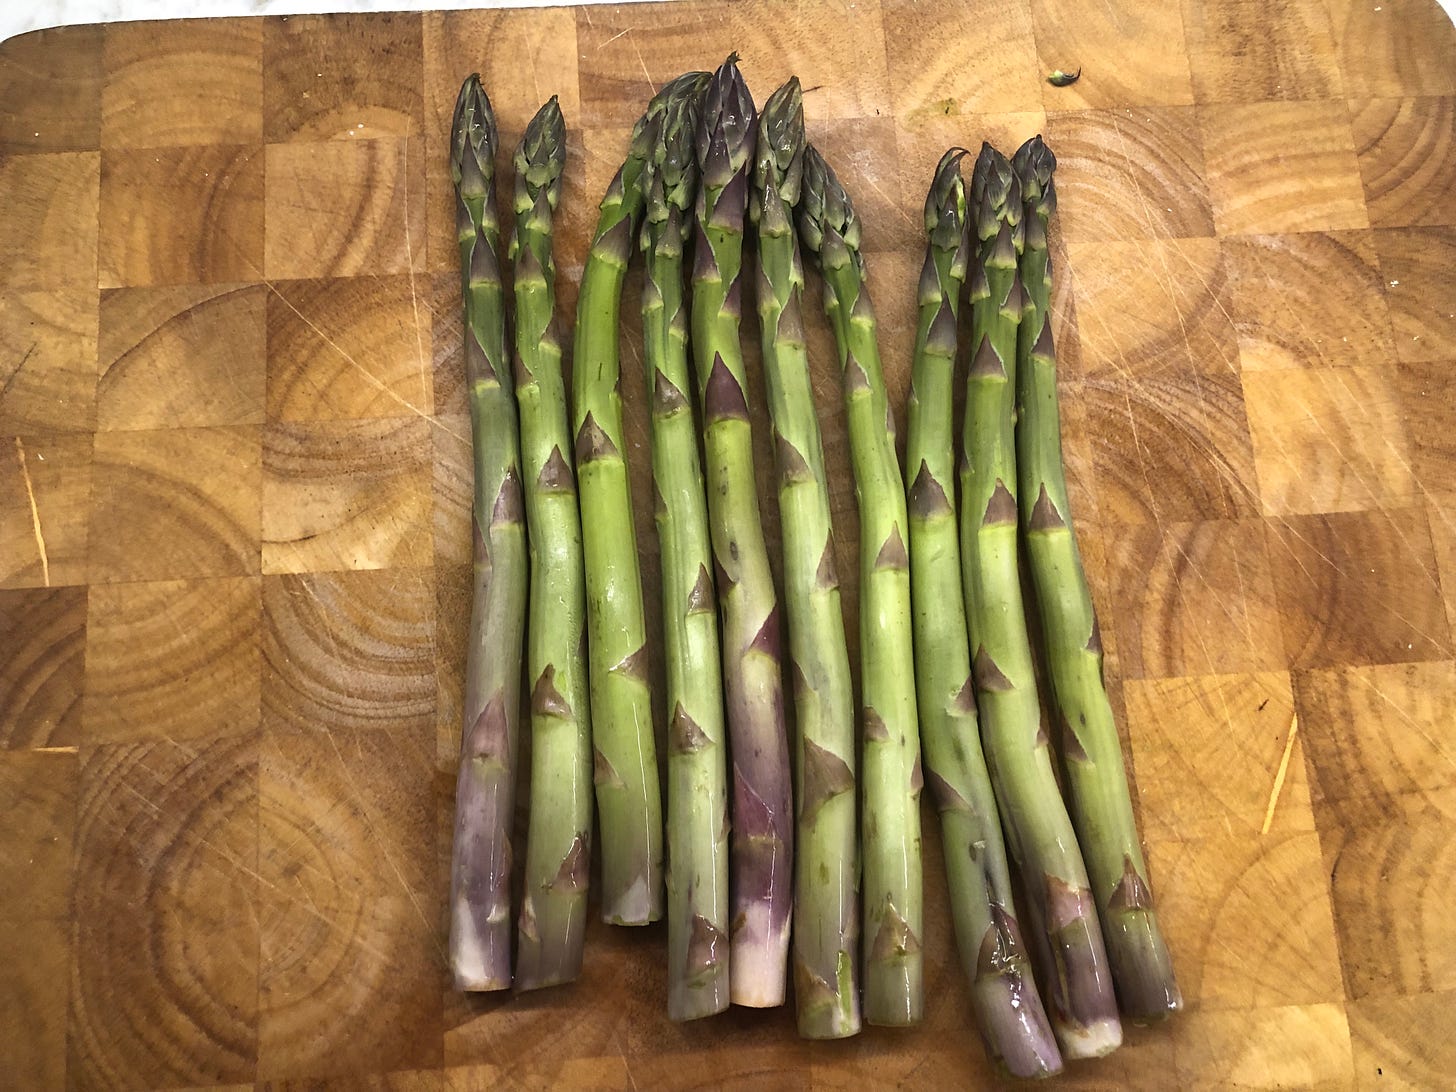 Ten spears of asparagus lying on a cutting board